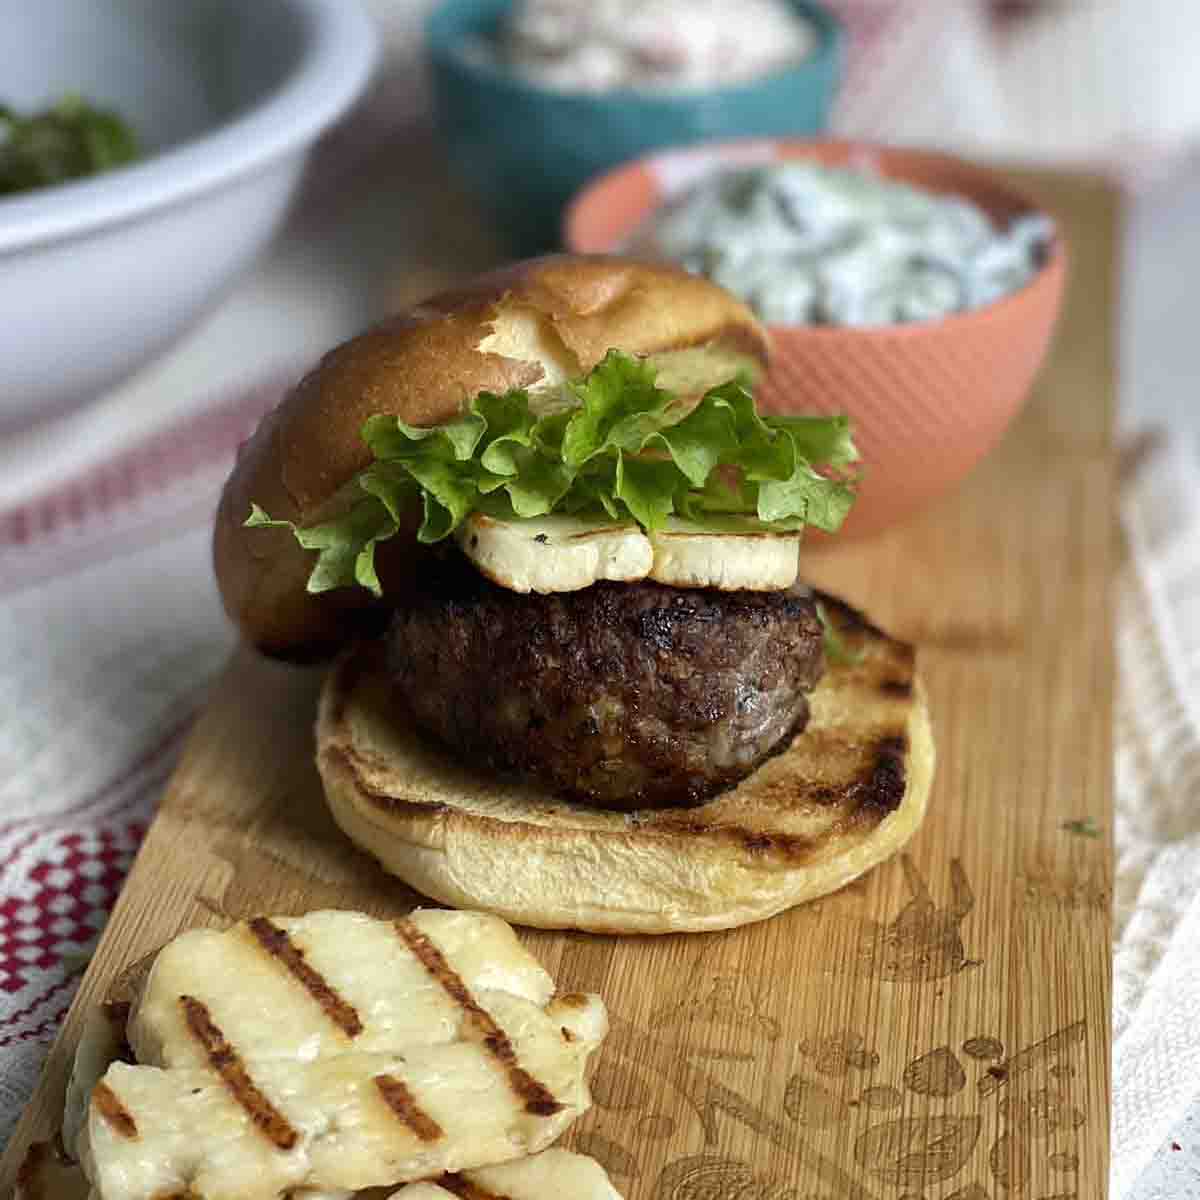 Minted lamb burger in a bun with halloumi on a board.